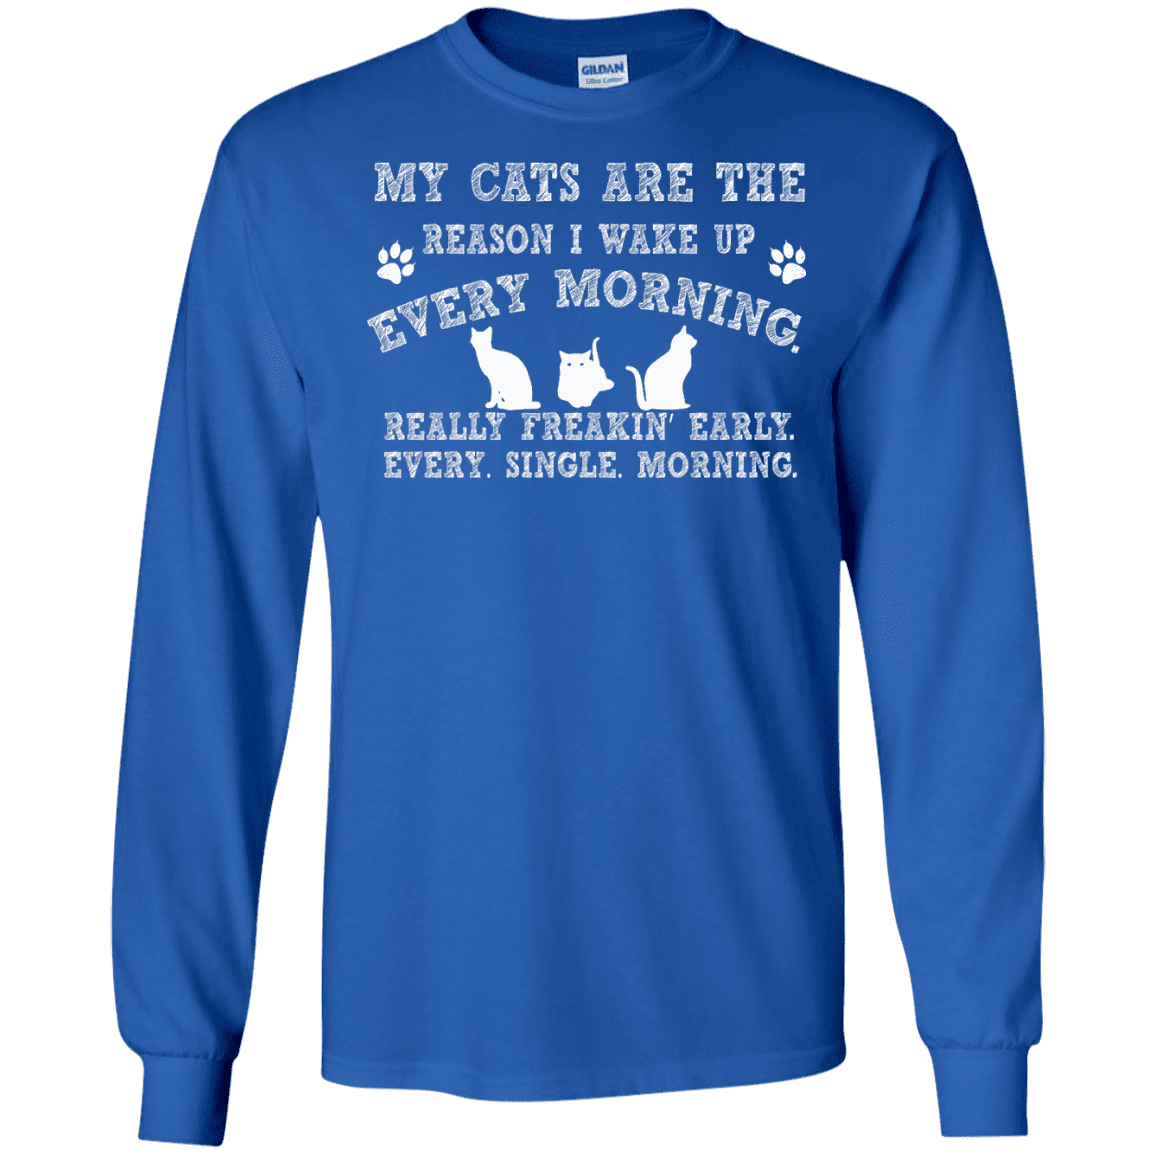 My Cats Are The Reason - Long Sleeve T Shirt.